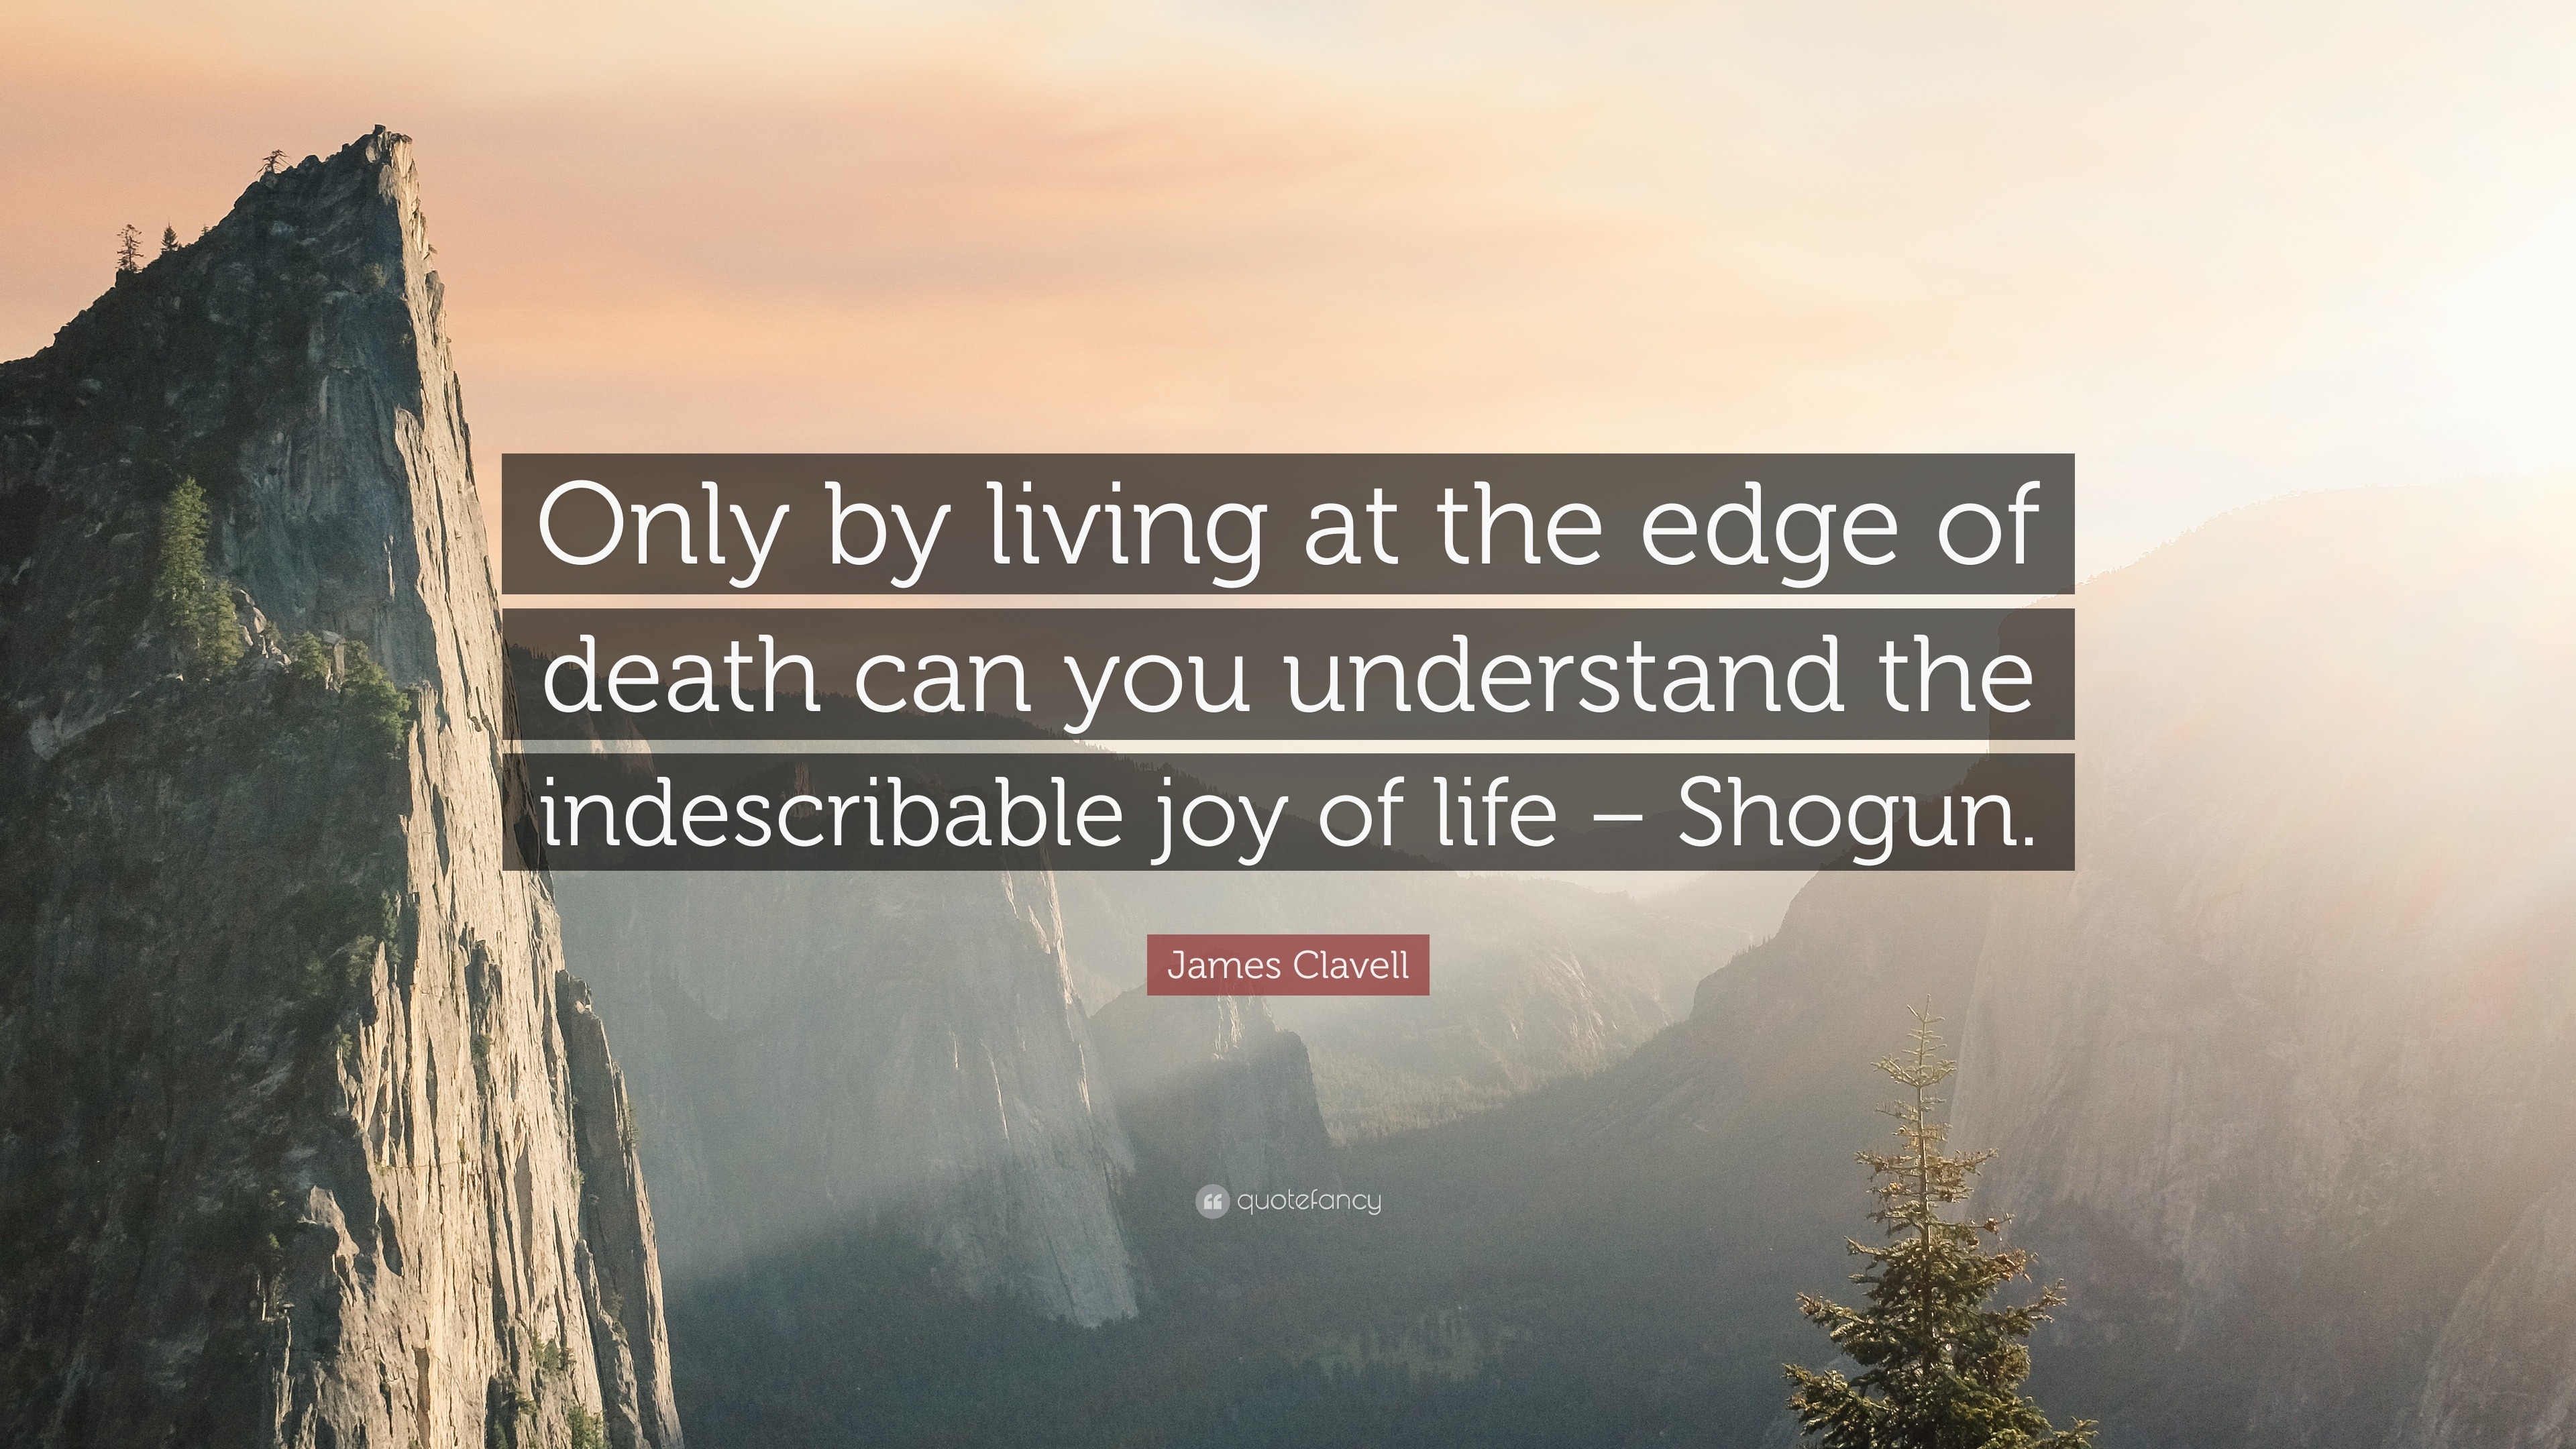 James Clavell Quote: “Only By Living At The Edge Of Death Can You Understand The Indescribable